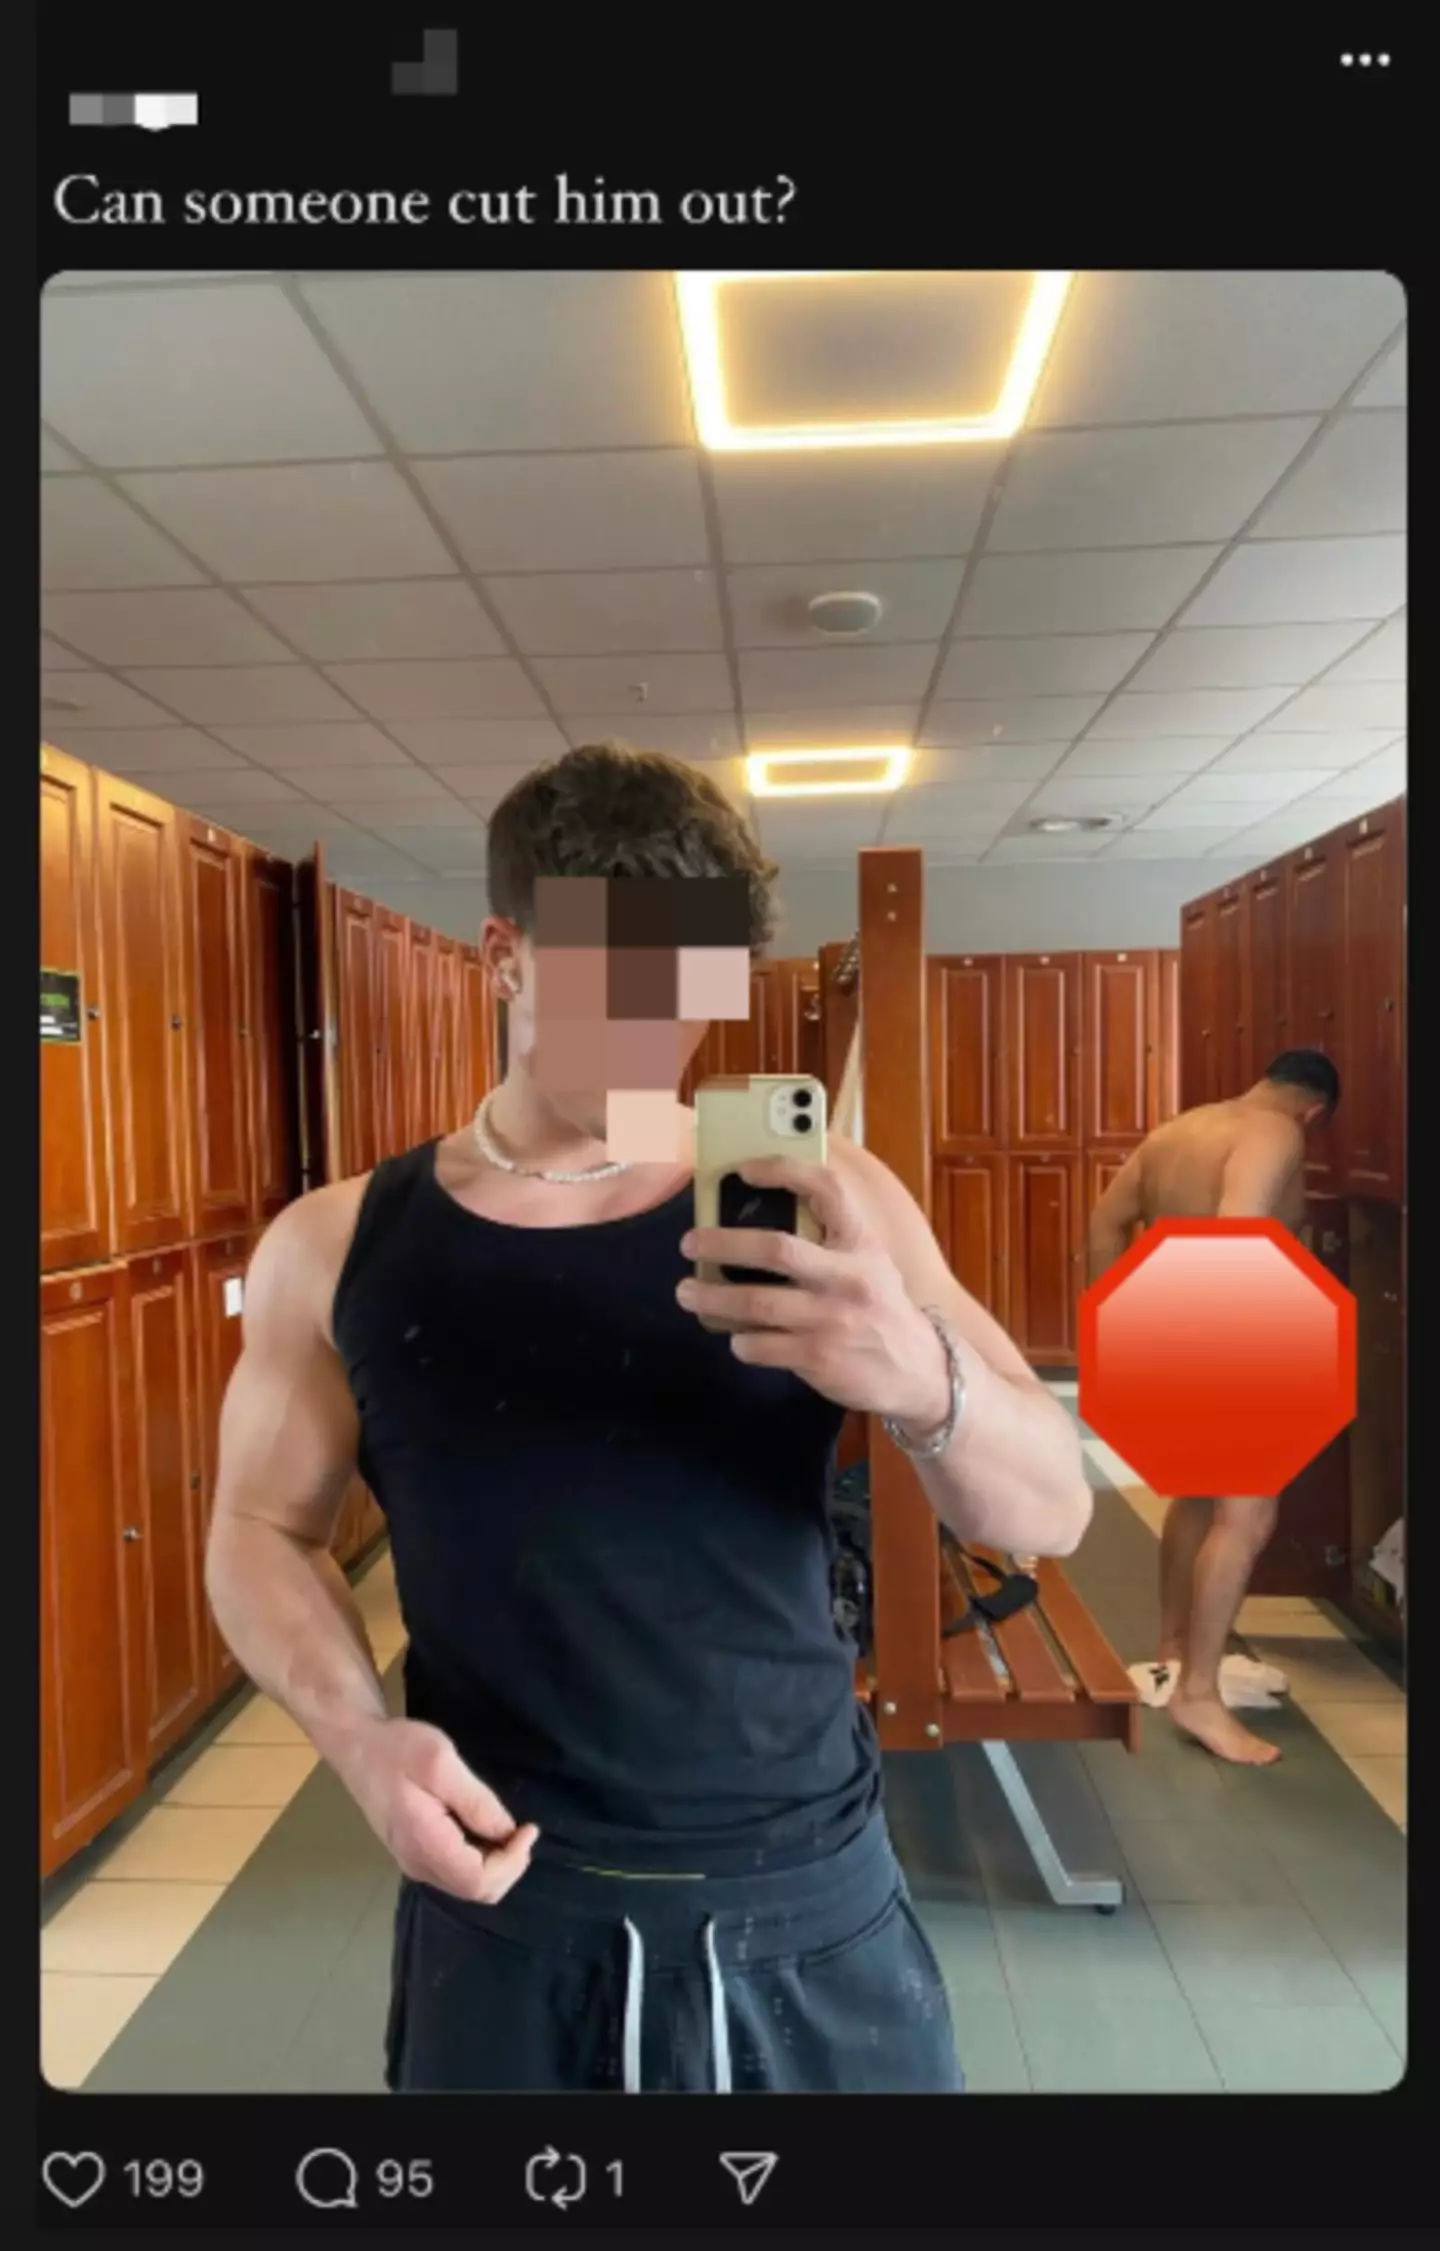 Joey Swoll has called for the gym to 'ban' the gym-goer taking the selfie (X) 